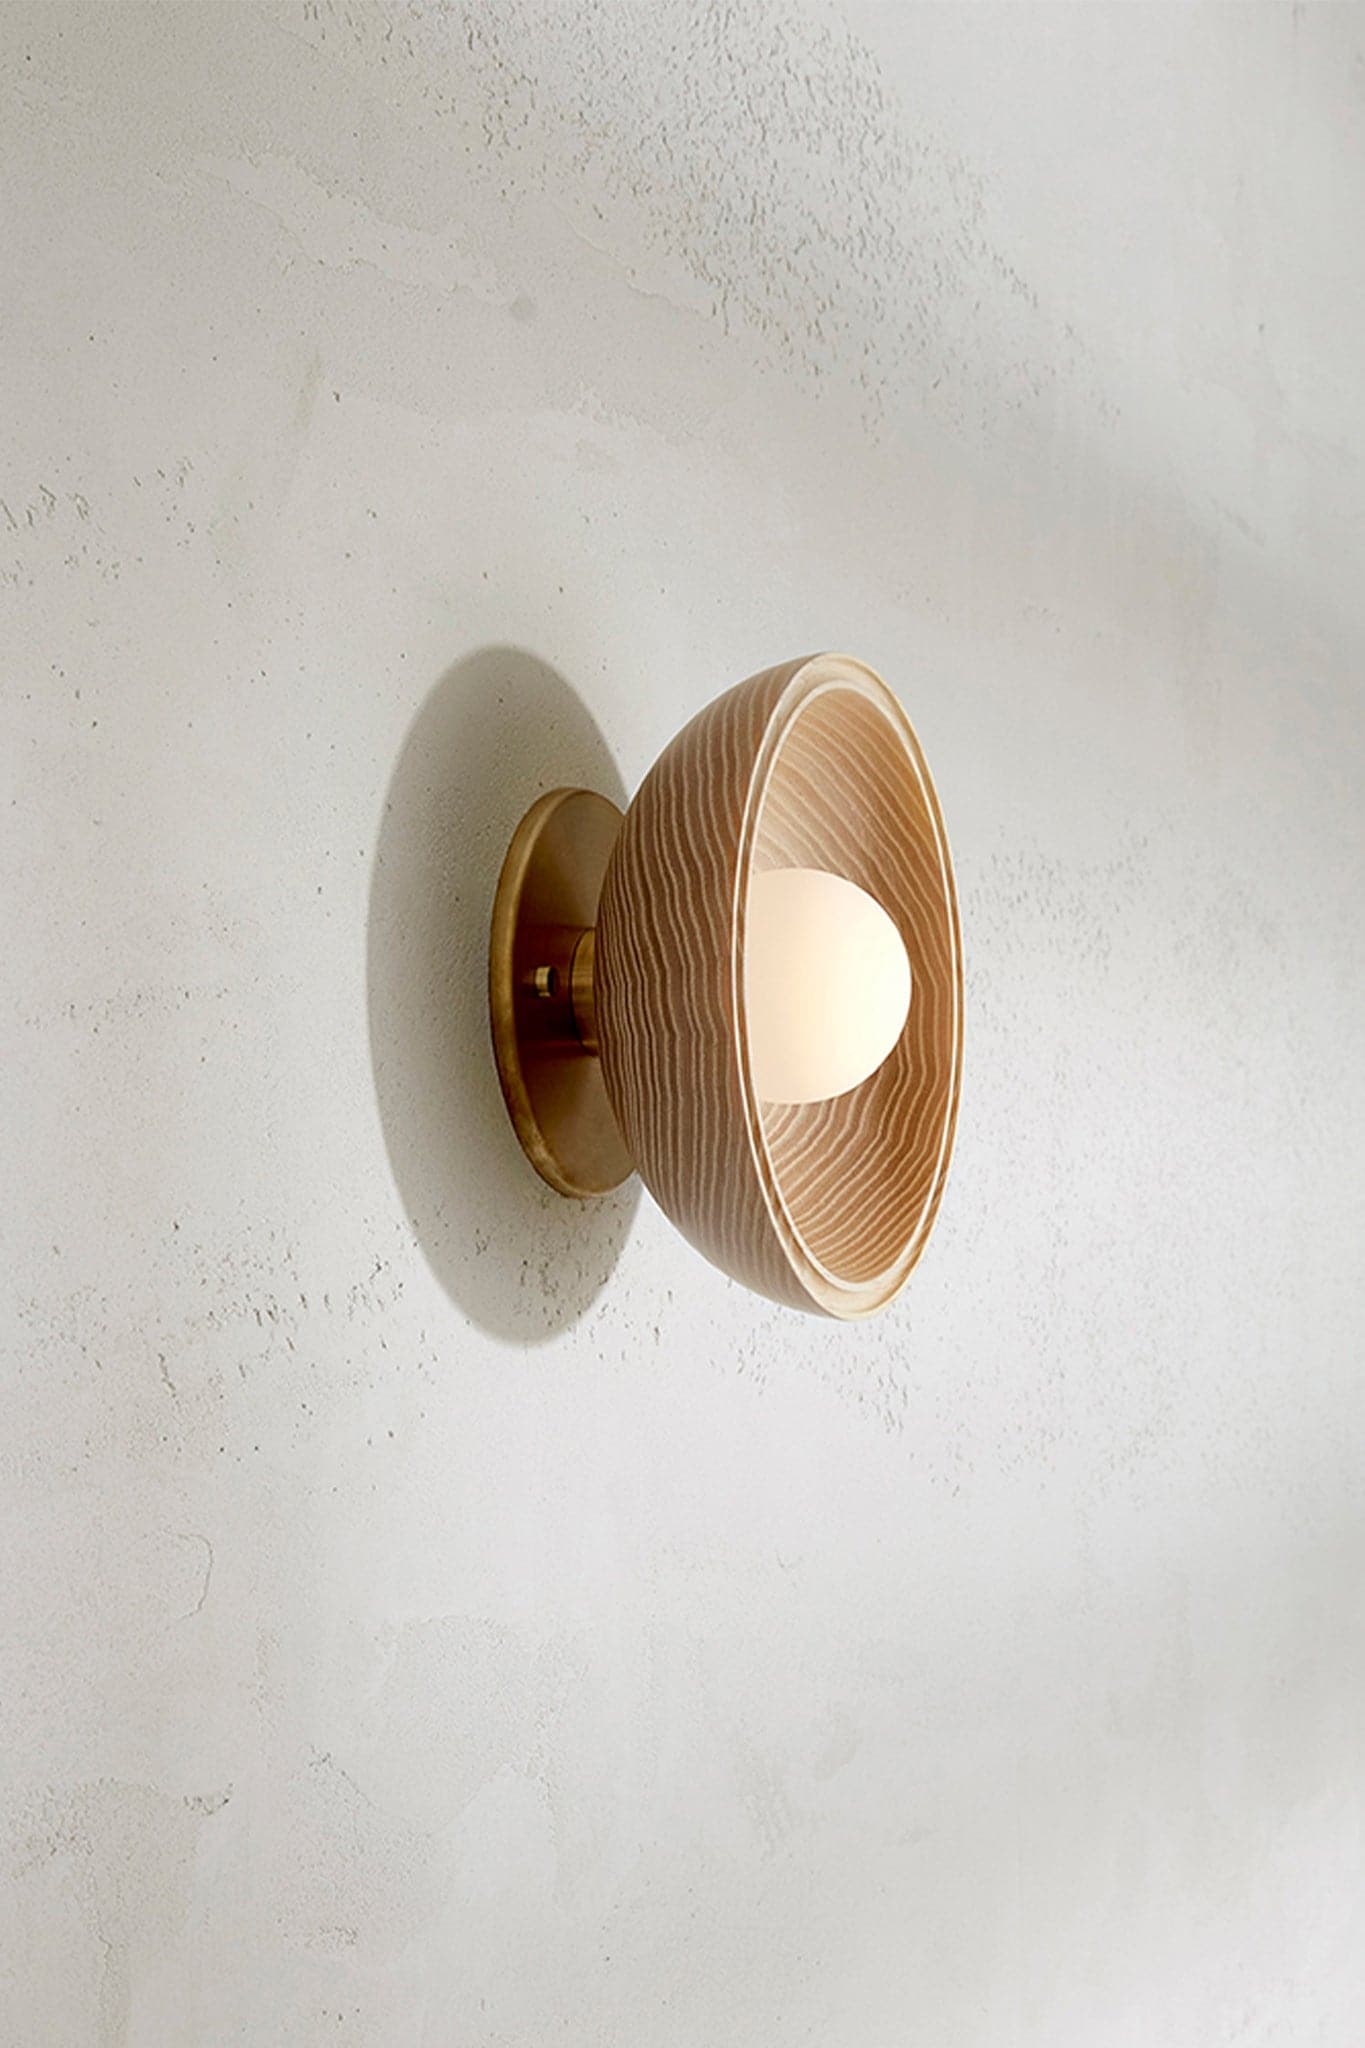 Marz Designs - Selene Surface Sconce Small in Brass/Ash